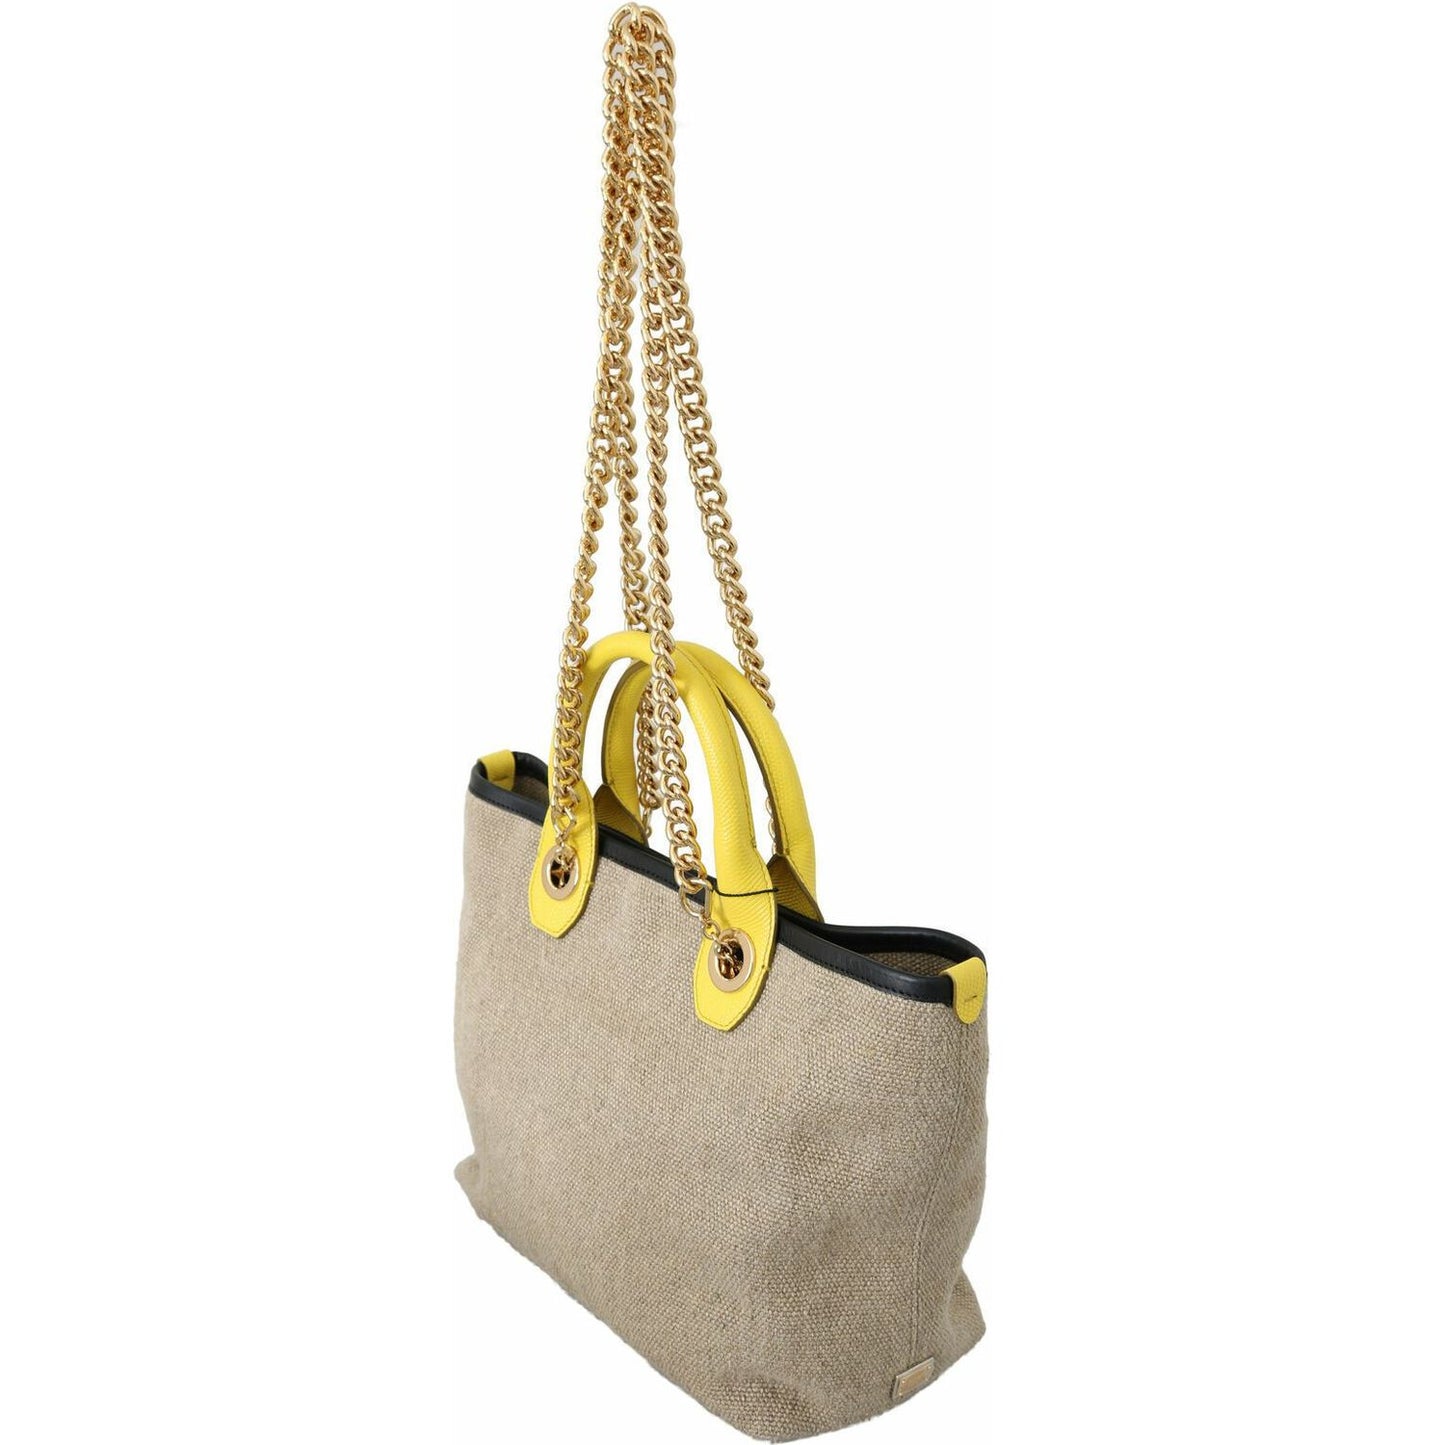 Dolce & Gabbana Beige Linen-Calf Tote with Gold Chain WOMAN SHOULDER BAGS beige-gold-chain-strap-shoulder-sling-purse-tote-bag